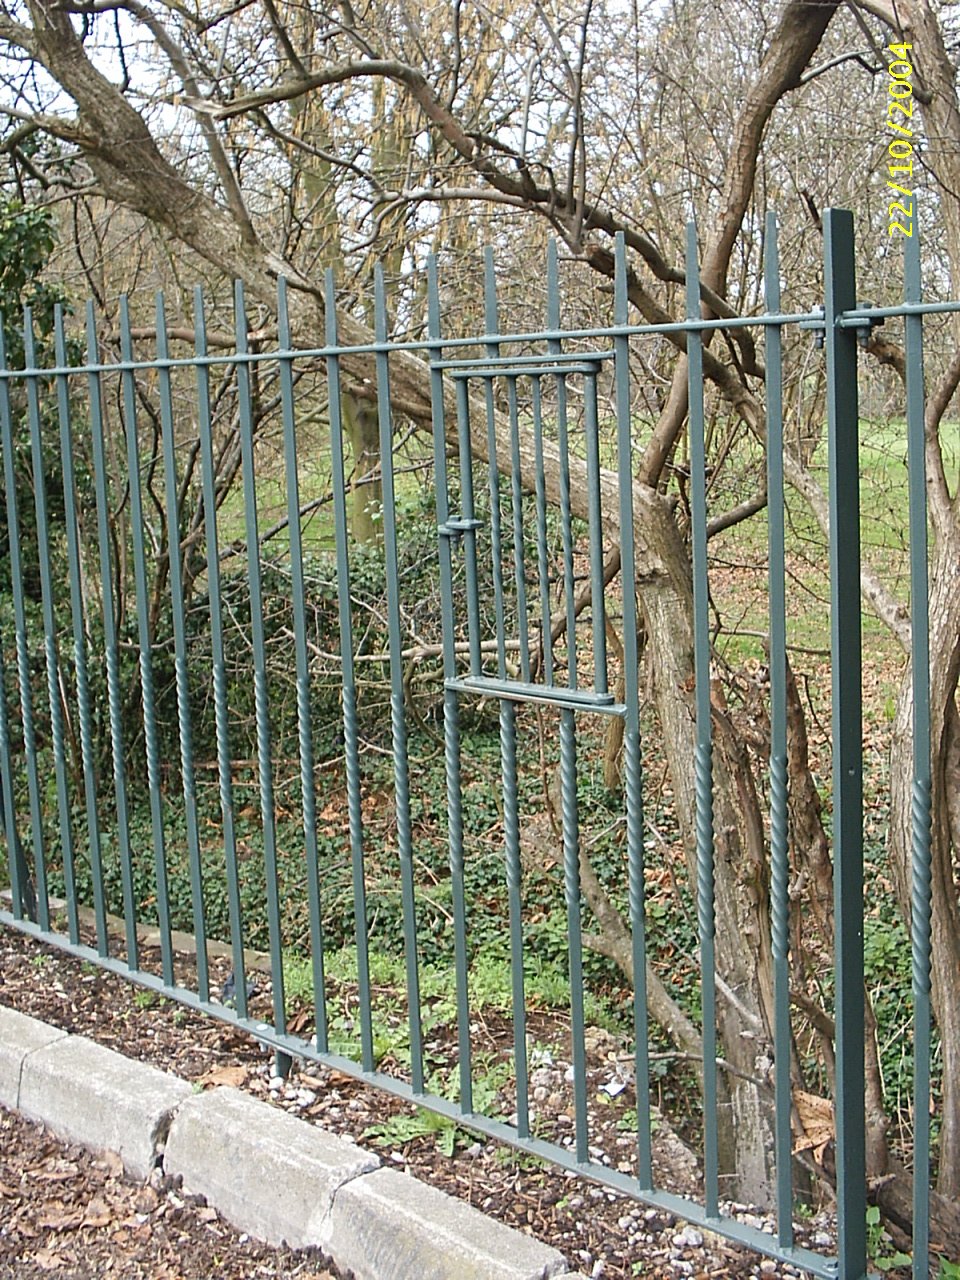 Pixie fence in holyhead road